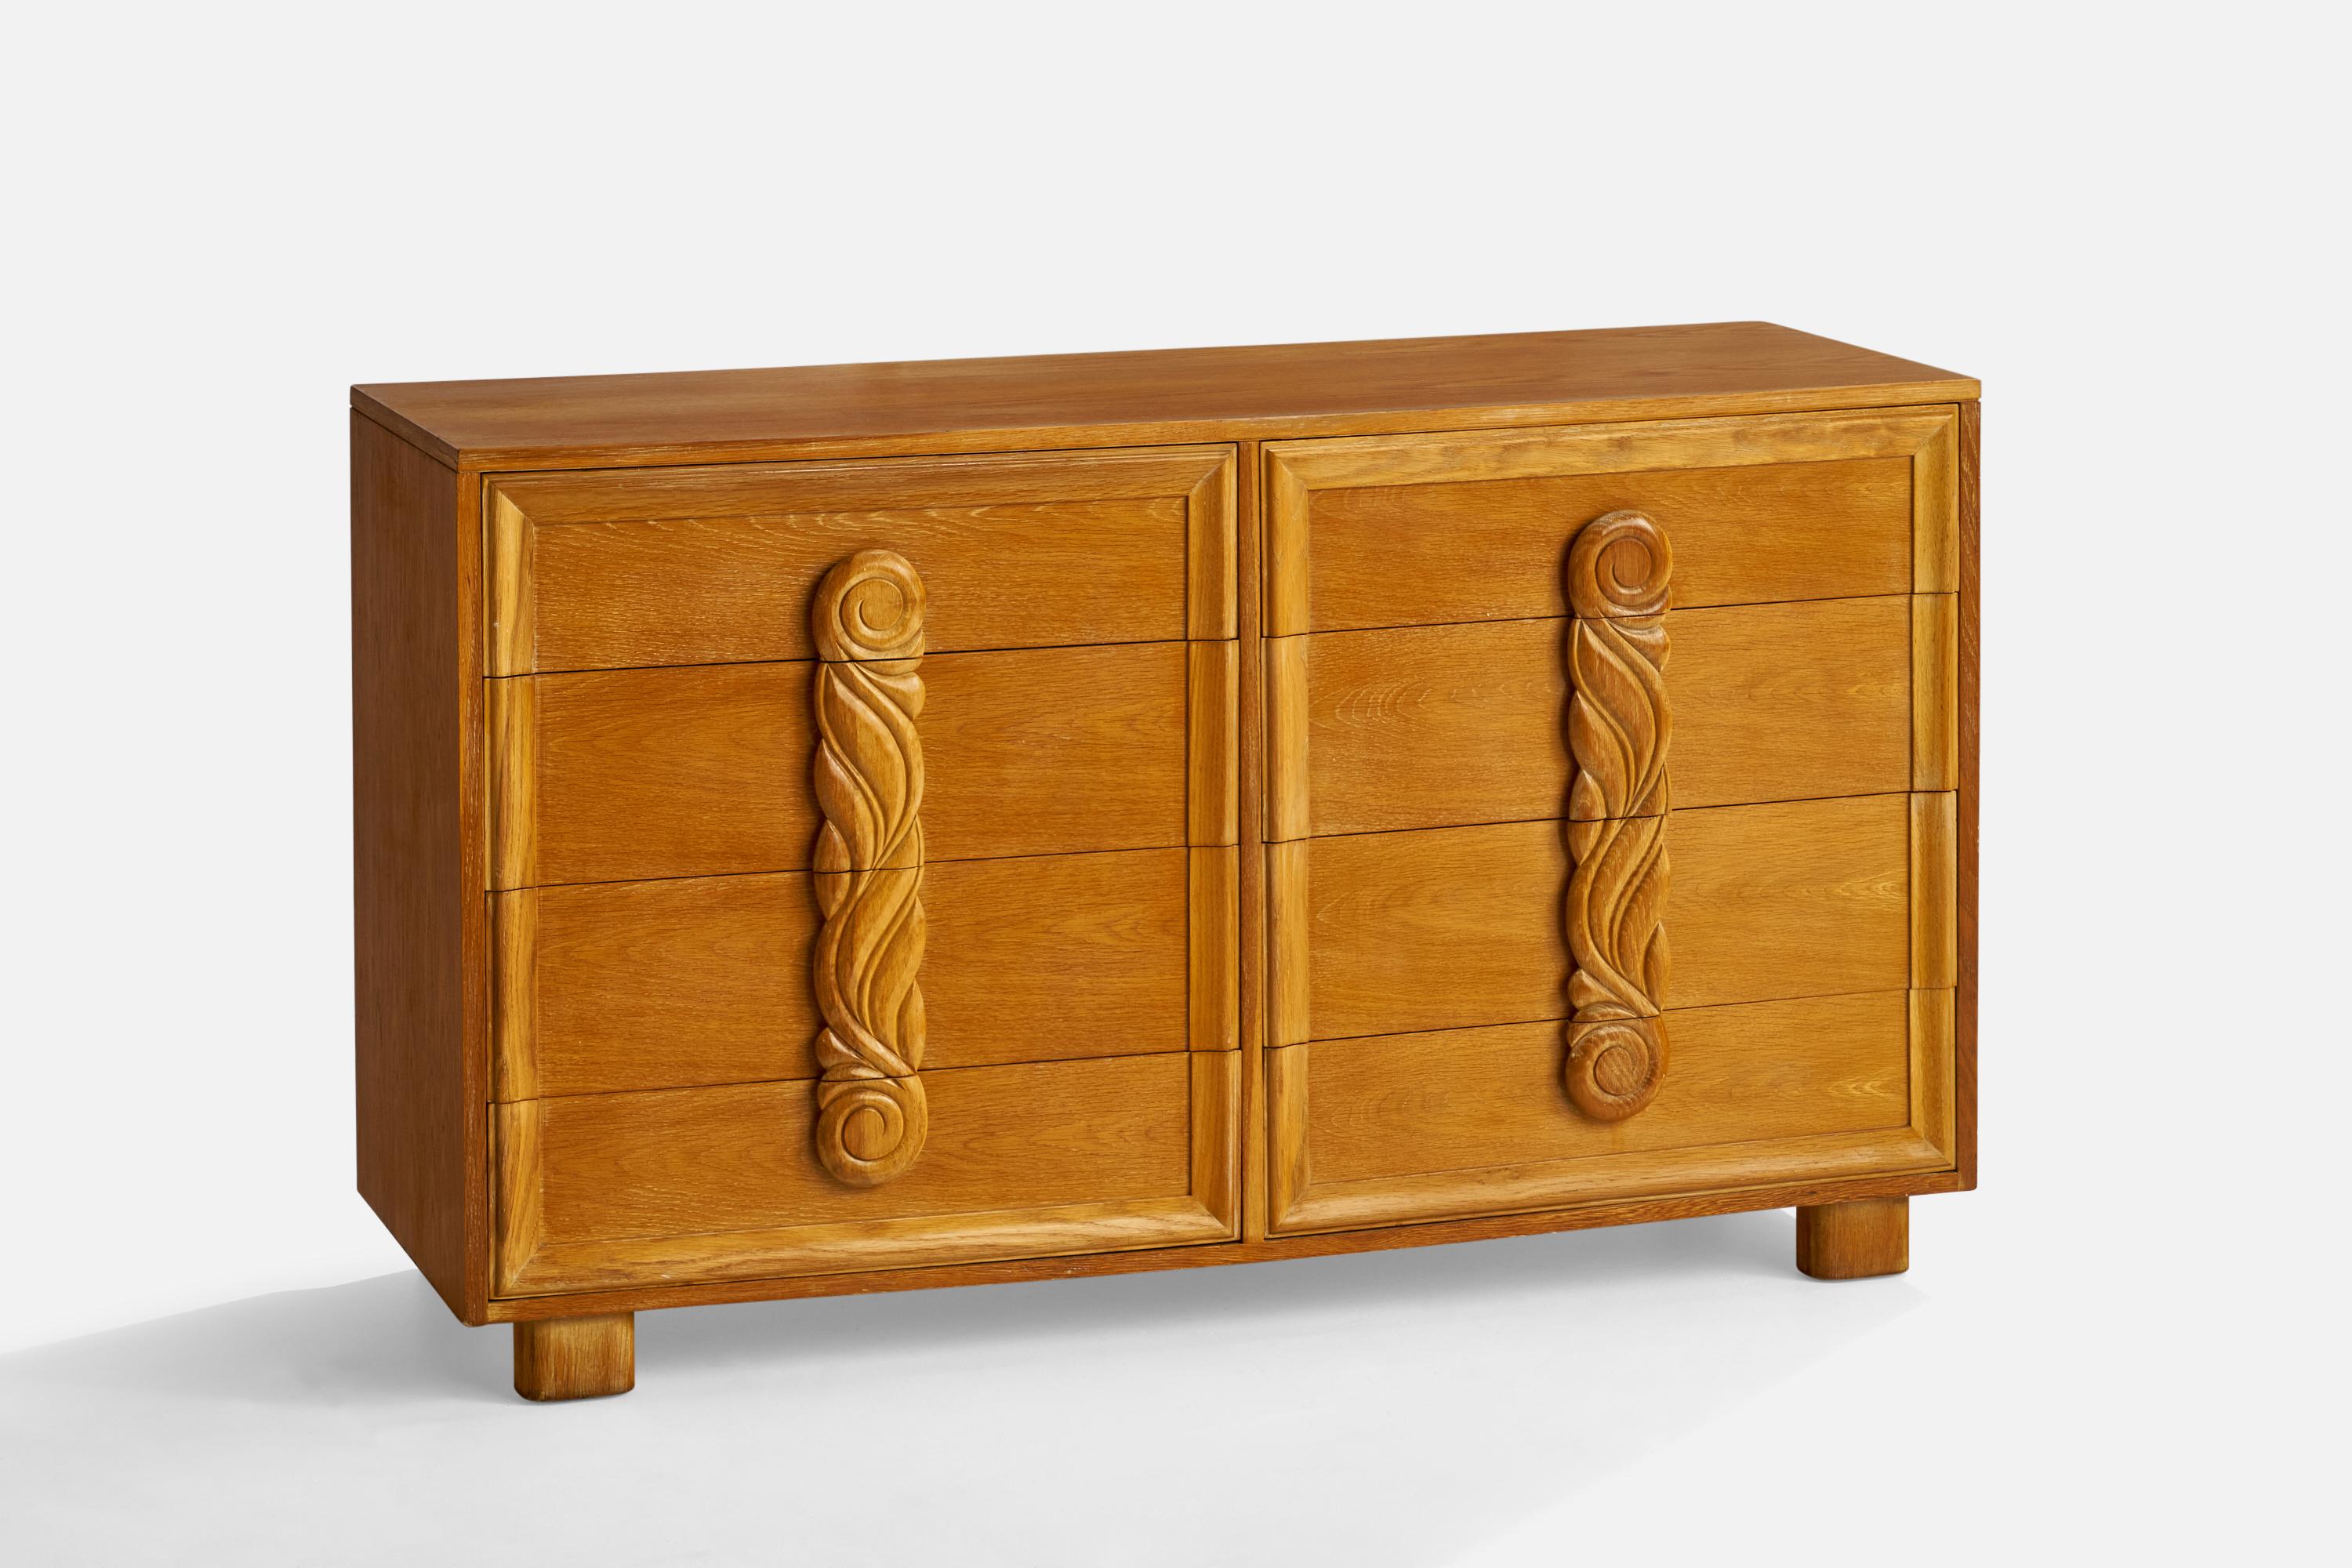 An oak dresser designed and produced by Rockford Furniture Company, USA, c. 1940s.